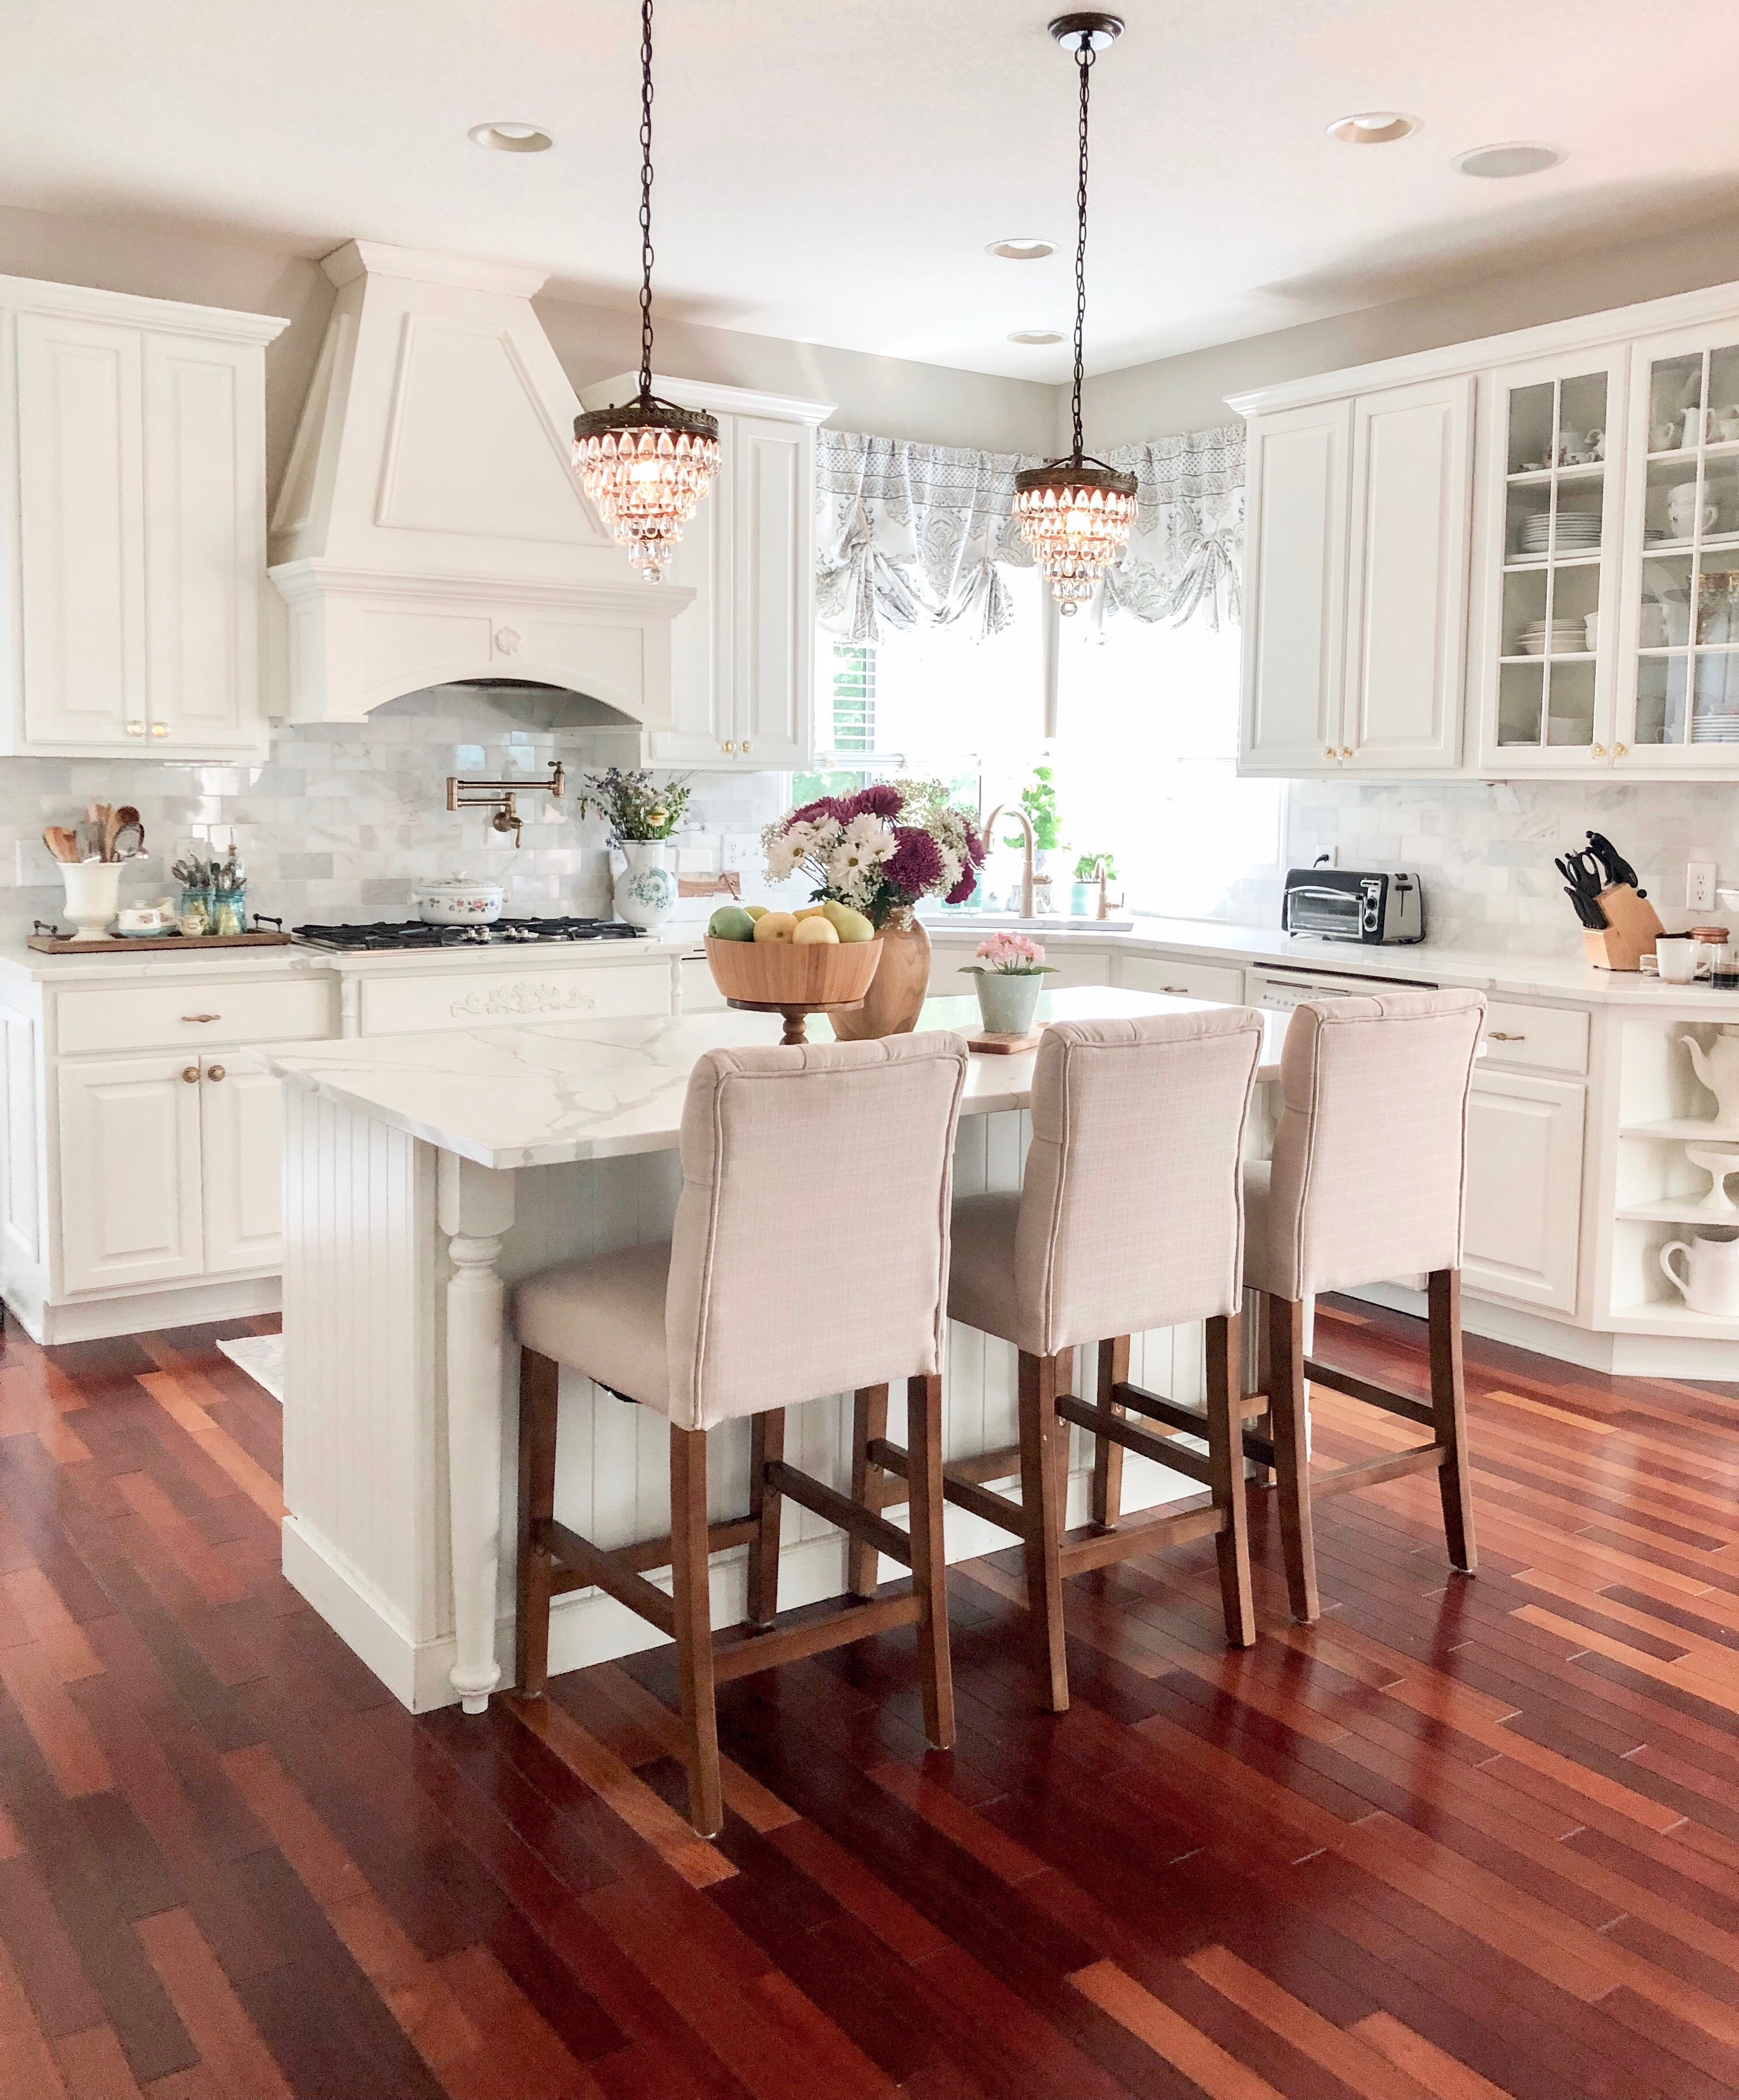 23 Recommended 3 4 Cherry Hardwood Flooring 2024 free download 3 4 cherry hardwood flooring of new hard wood floors selection process styled with lace with regard to this is a before photo without edits of the kitchen with the brazilian cherry floor you